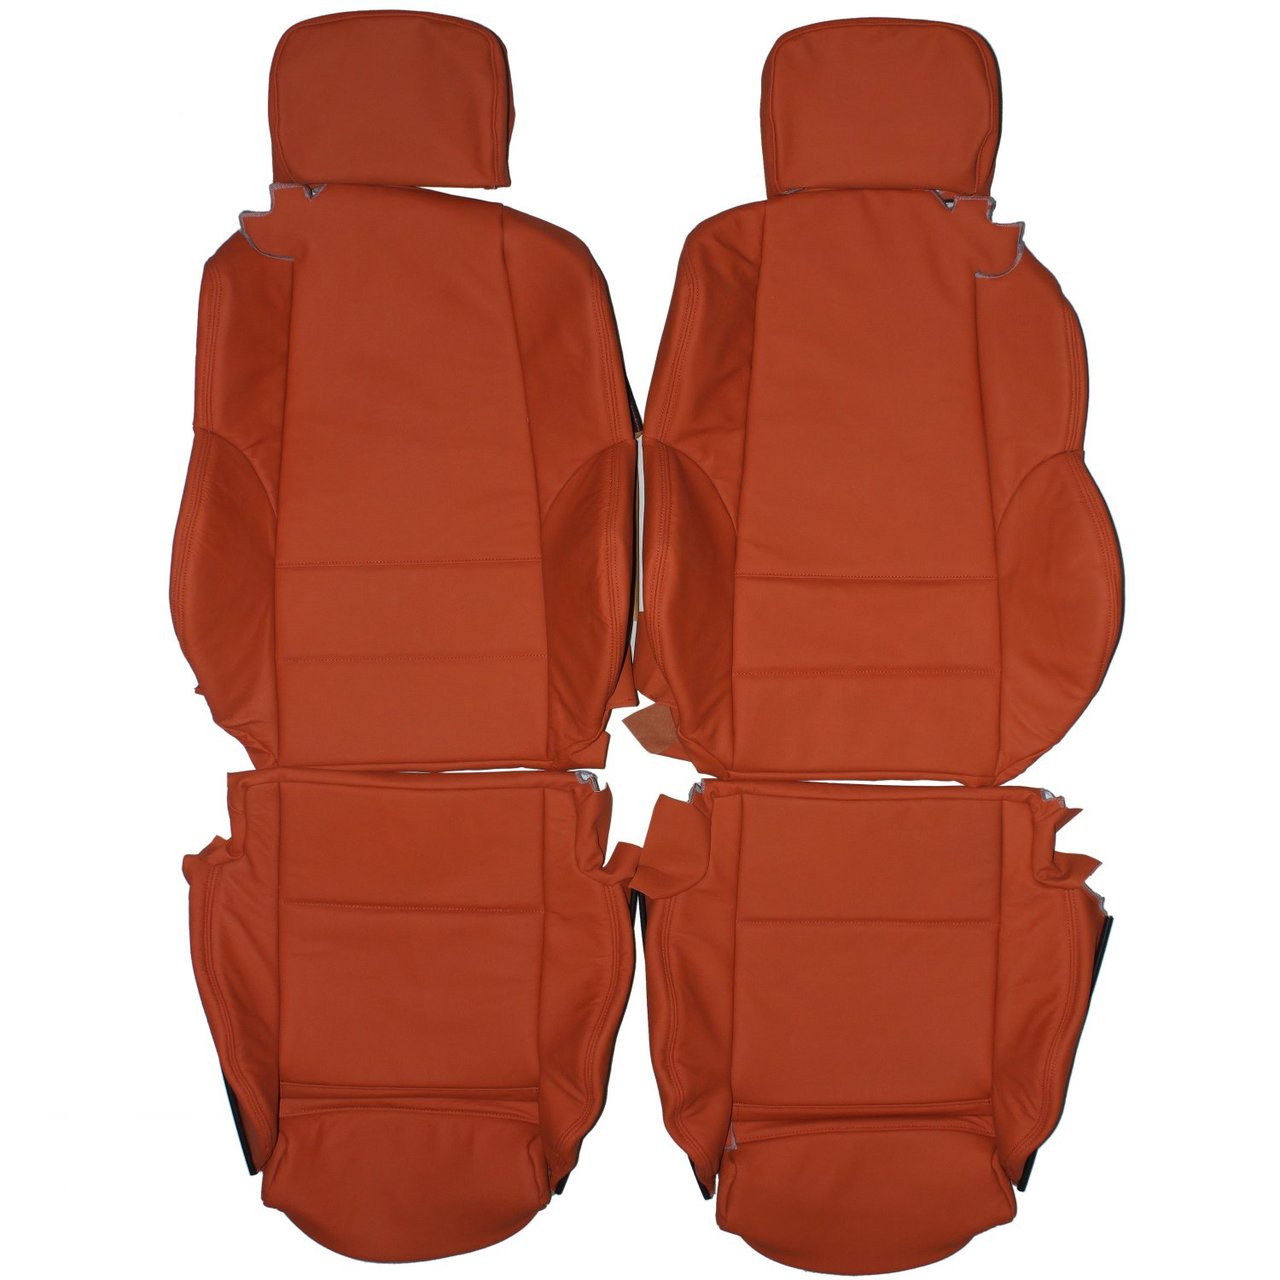 1998-2004 BMW E46 Convertible Sport Custom Real Leather Seat Covers (Front)  - Lseat.com